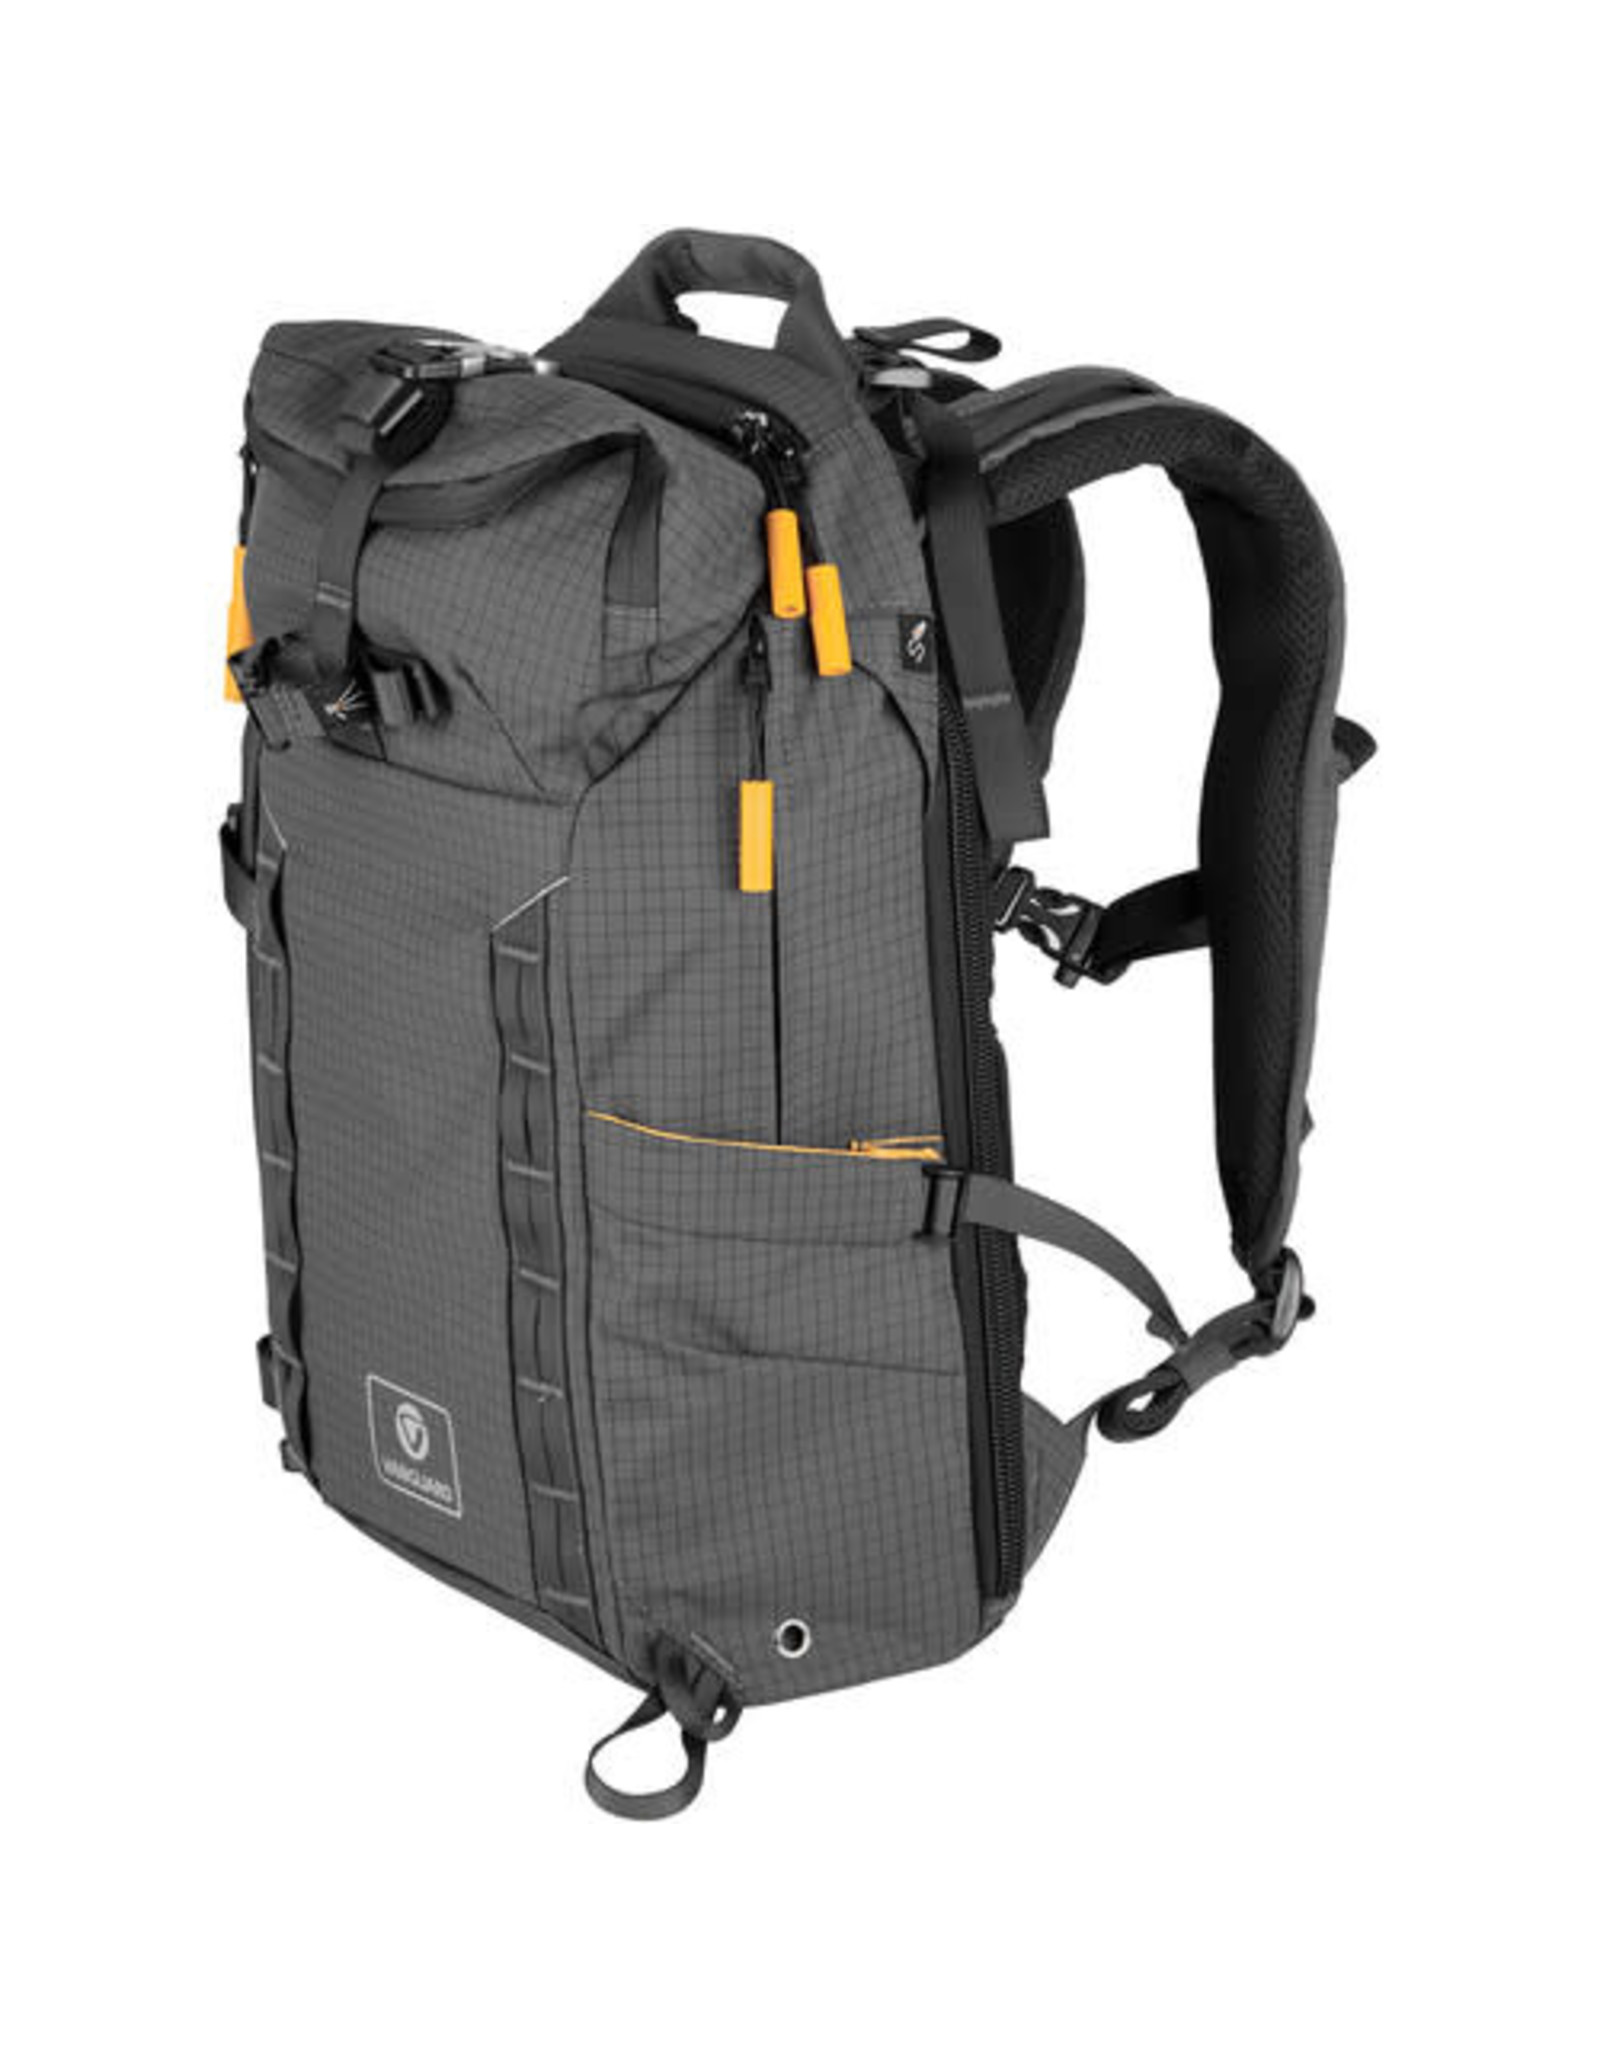 Vanguard VEO ACTIVE 42M CAMERA BACKPACK W/ USB CHARGER CONNECTOR (CHOOSE COLOR)